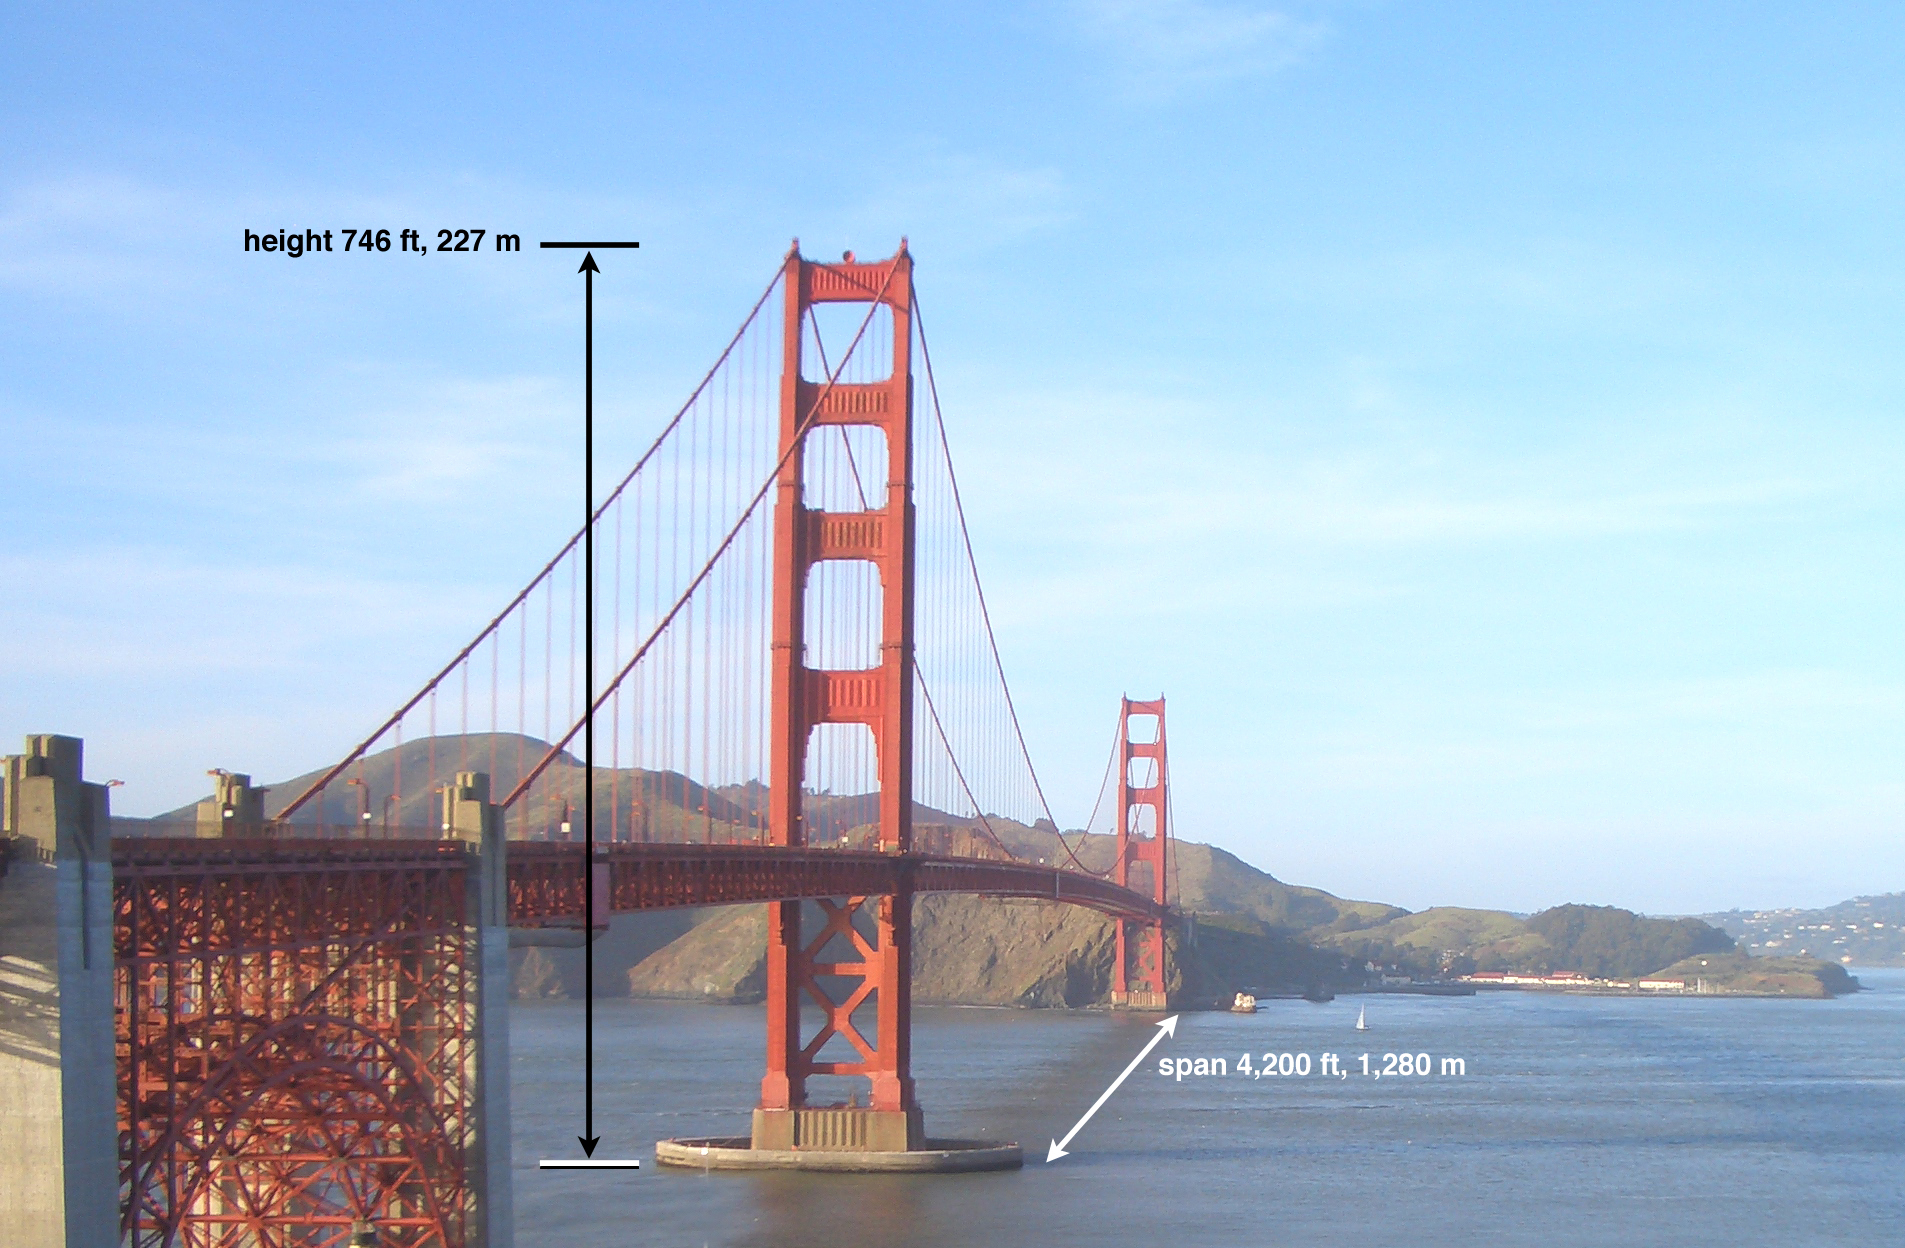 The Golden Gate Bridge: History and Fun Facts